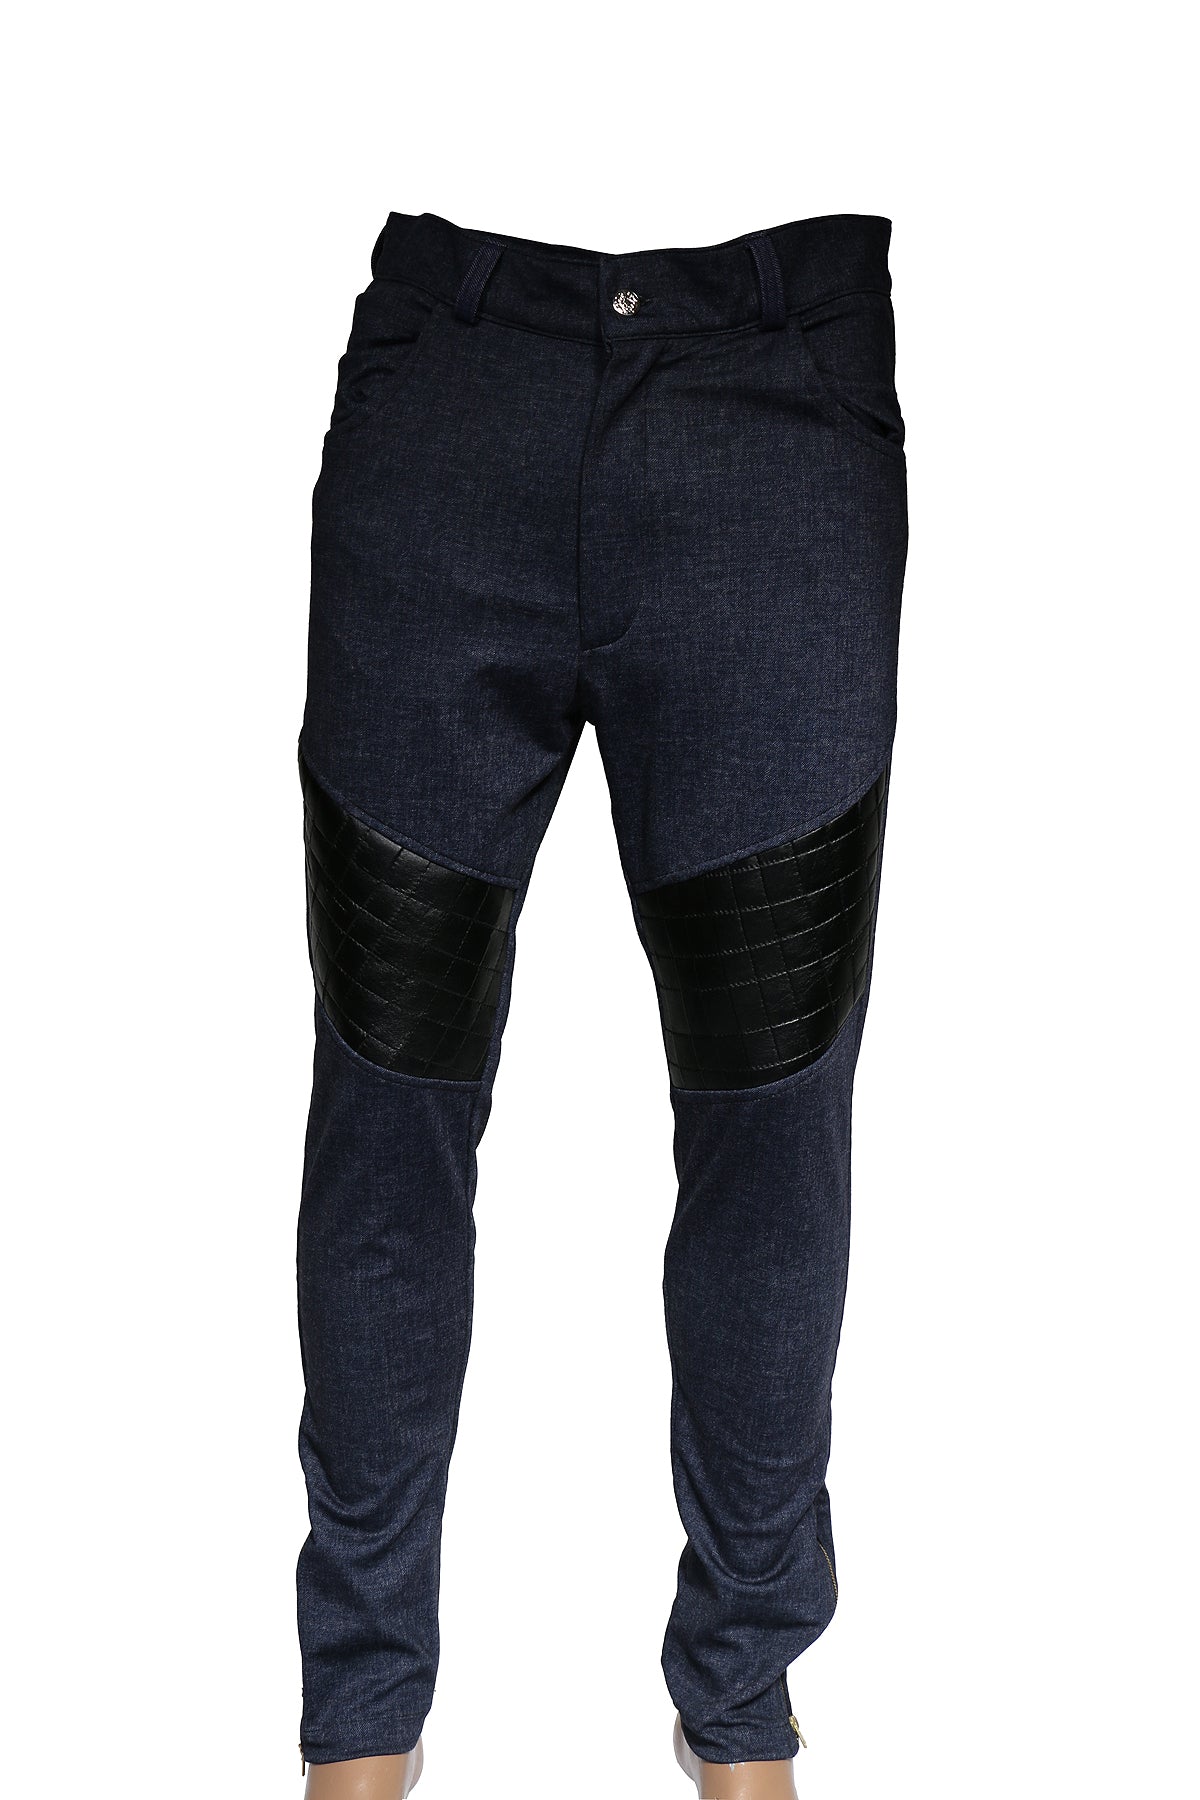 Modern denim jeans with leather pads